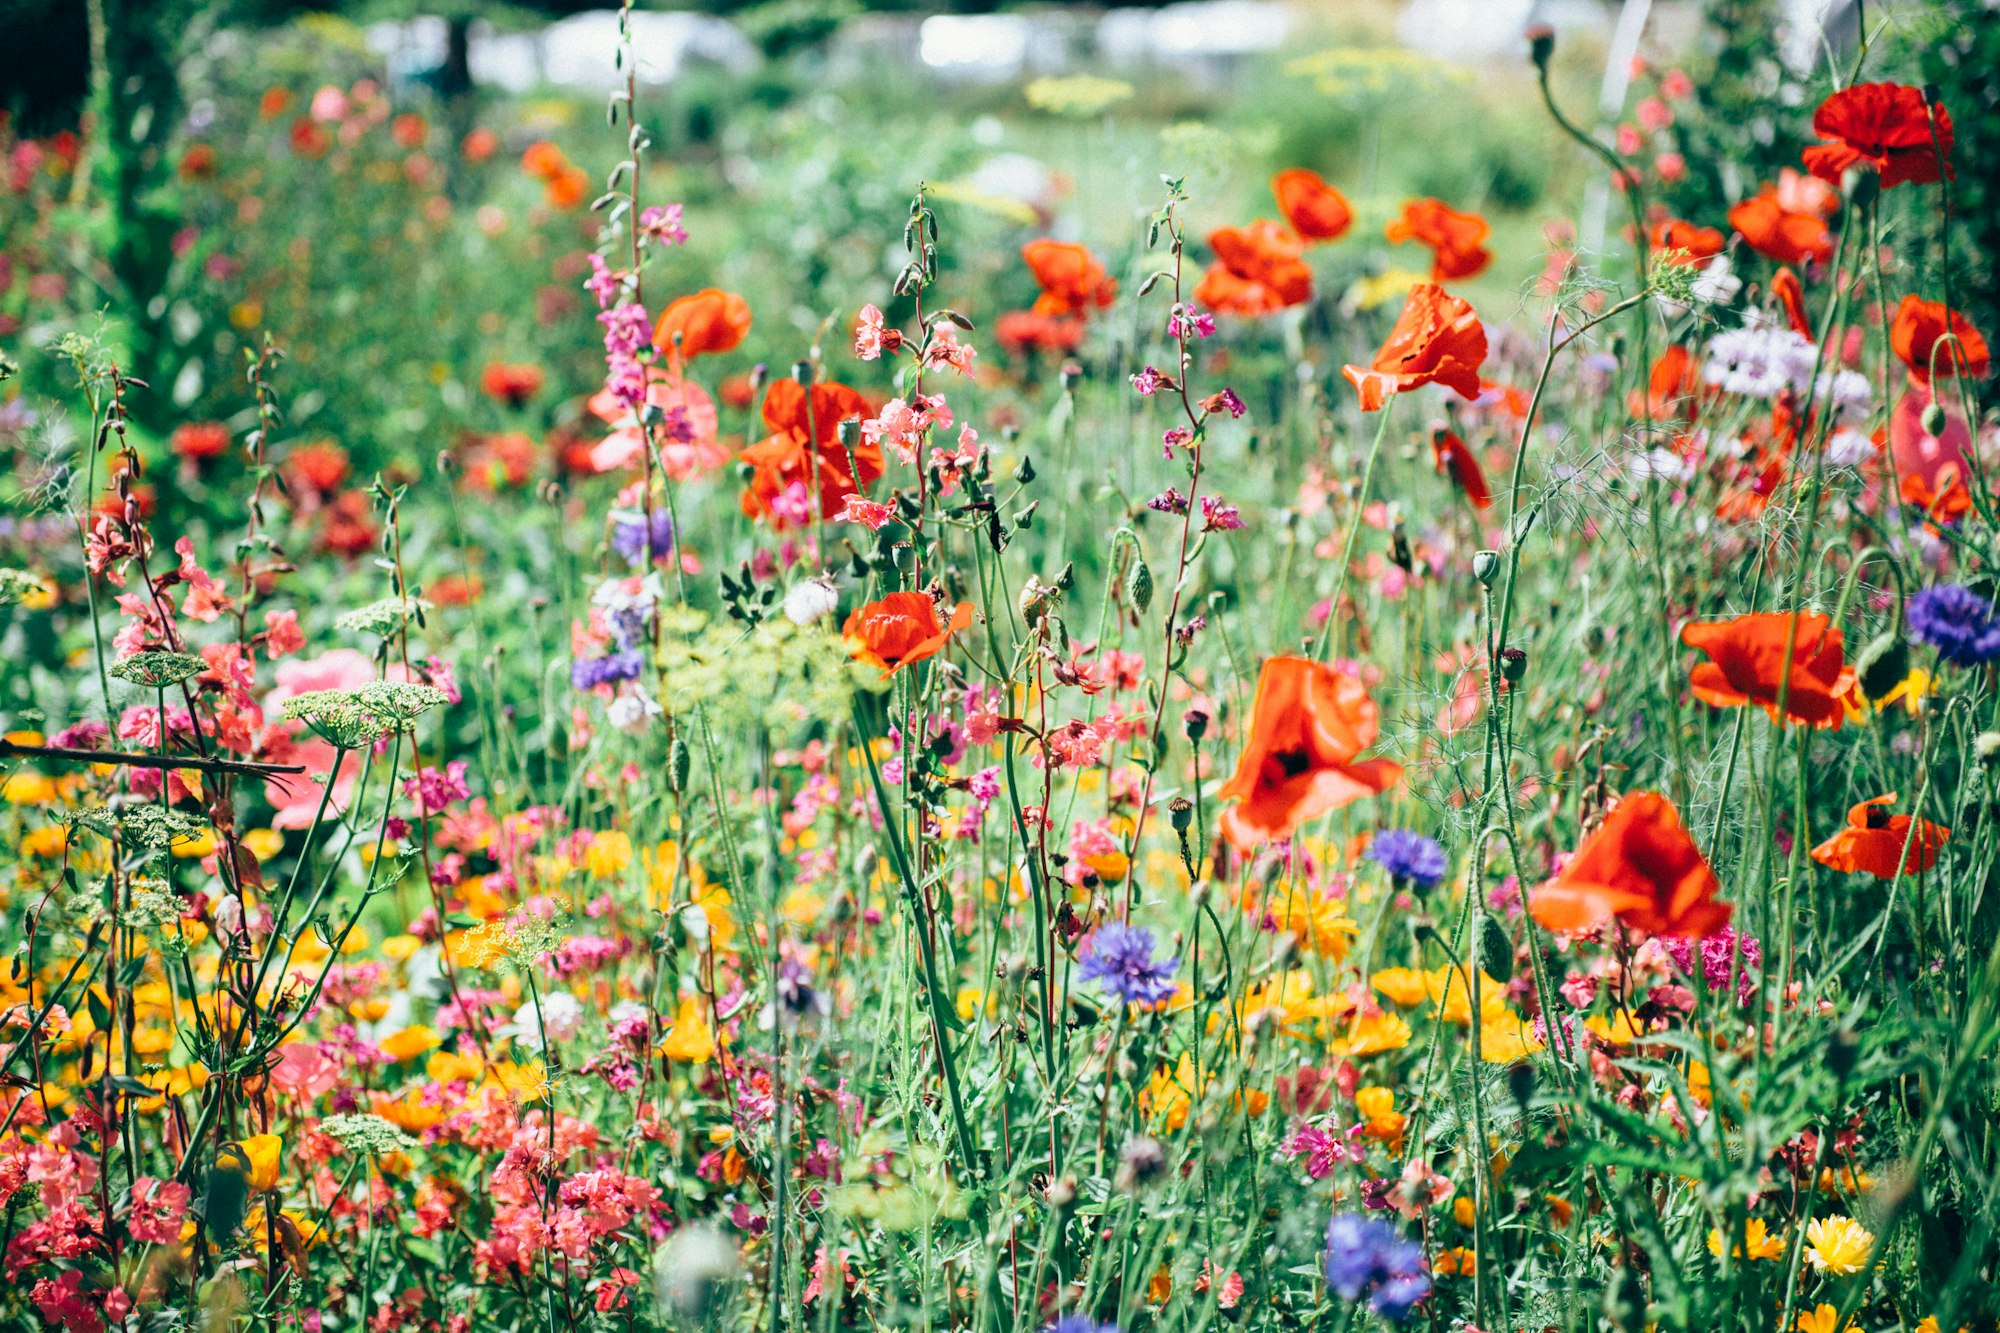 A diverse field of wildflowers